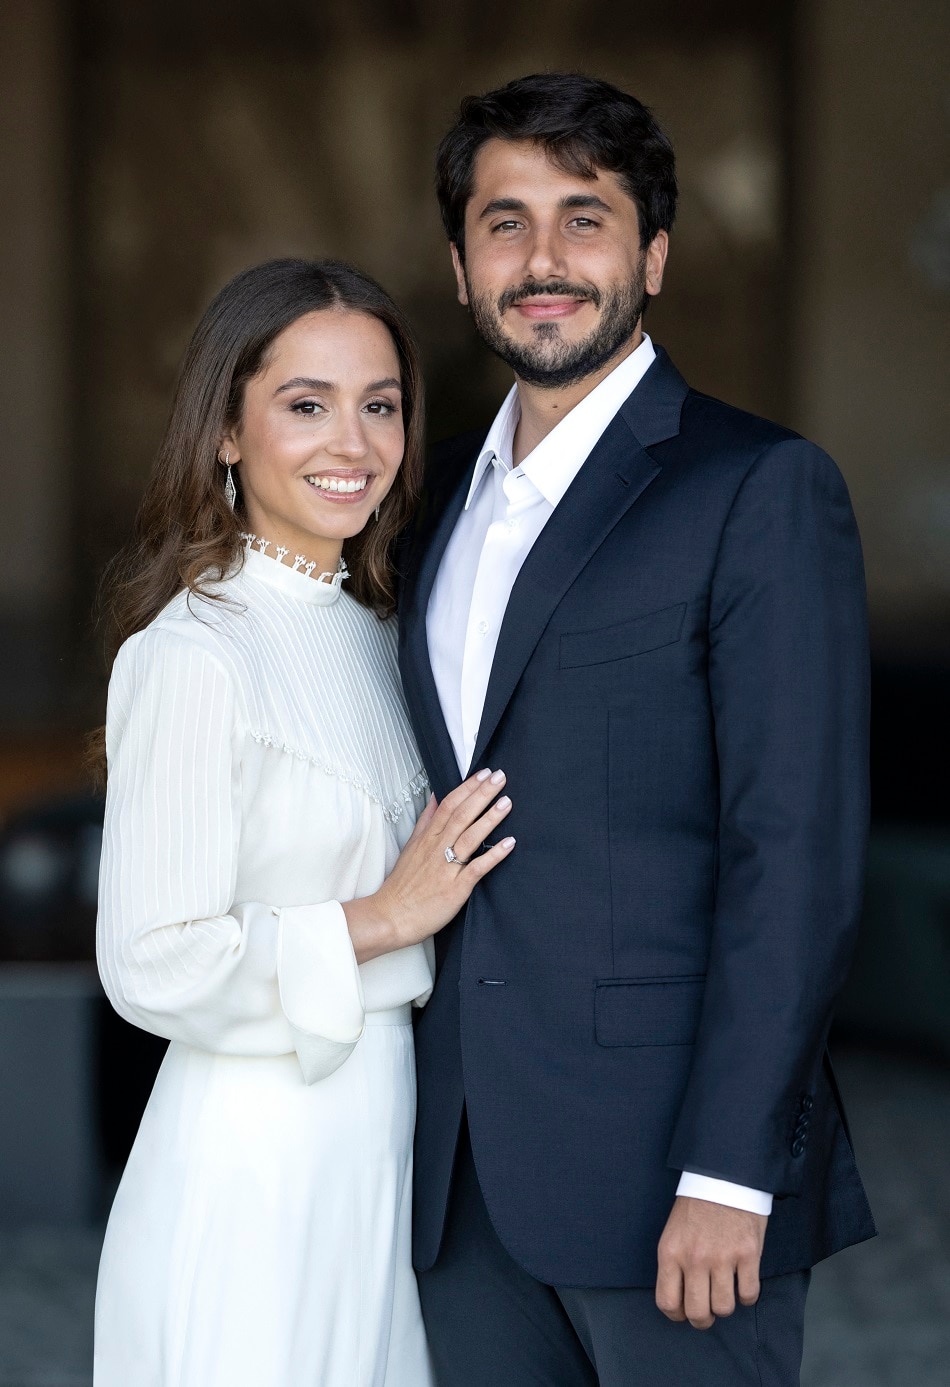 A handout picture released by Jordanian Royal Palace shows Princess Iman, the daughter of King Abdullah II of Jordan, with her fiance Jameel Alexander Thermiotis during their engagement ceremony in Amman on July 5, 2022. The Royal Hashemite Court announced the engagement of the princess to Thermiotis who was born in 1994 in Venezuela to a family of Greek origin and currently works in the field of finance in New York. Jordanian Royal Palace / AFP